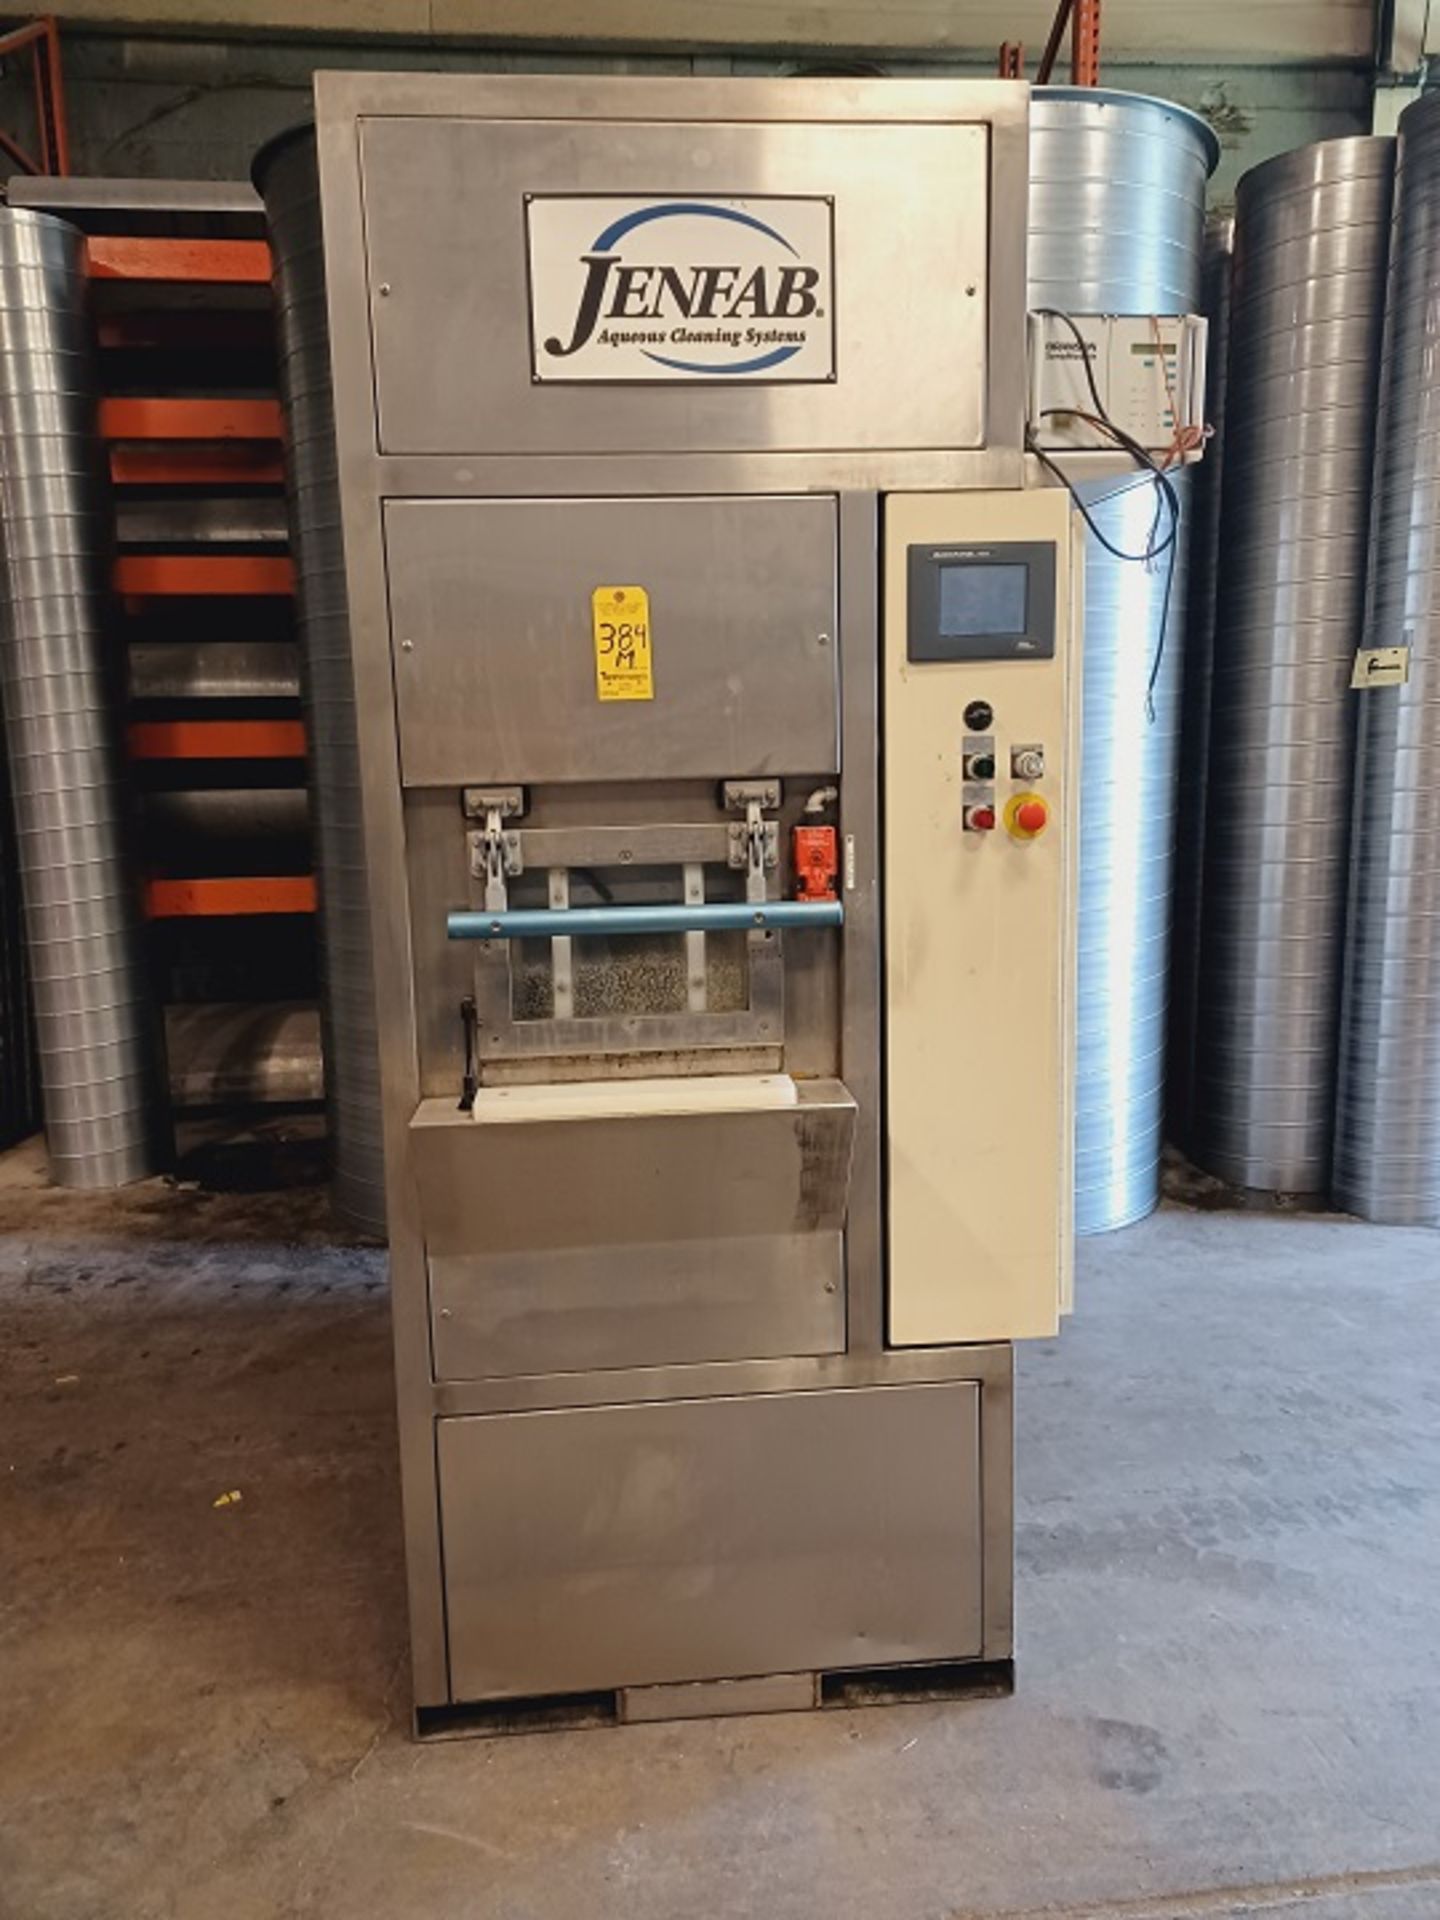 JenFab Aqueous Cleaning System, 6.5" X 12" Opening, Branson Sono Module Control - Image 5 of 5